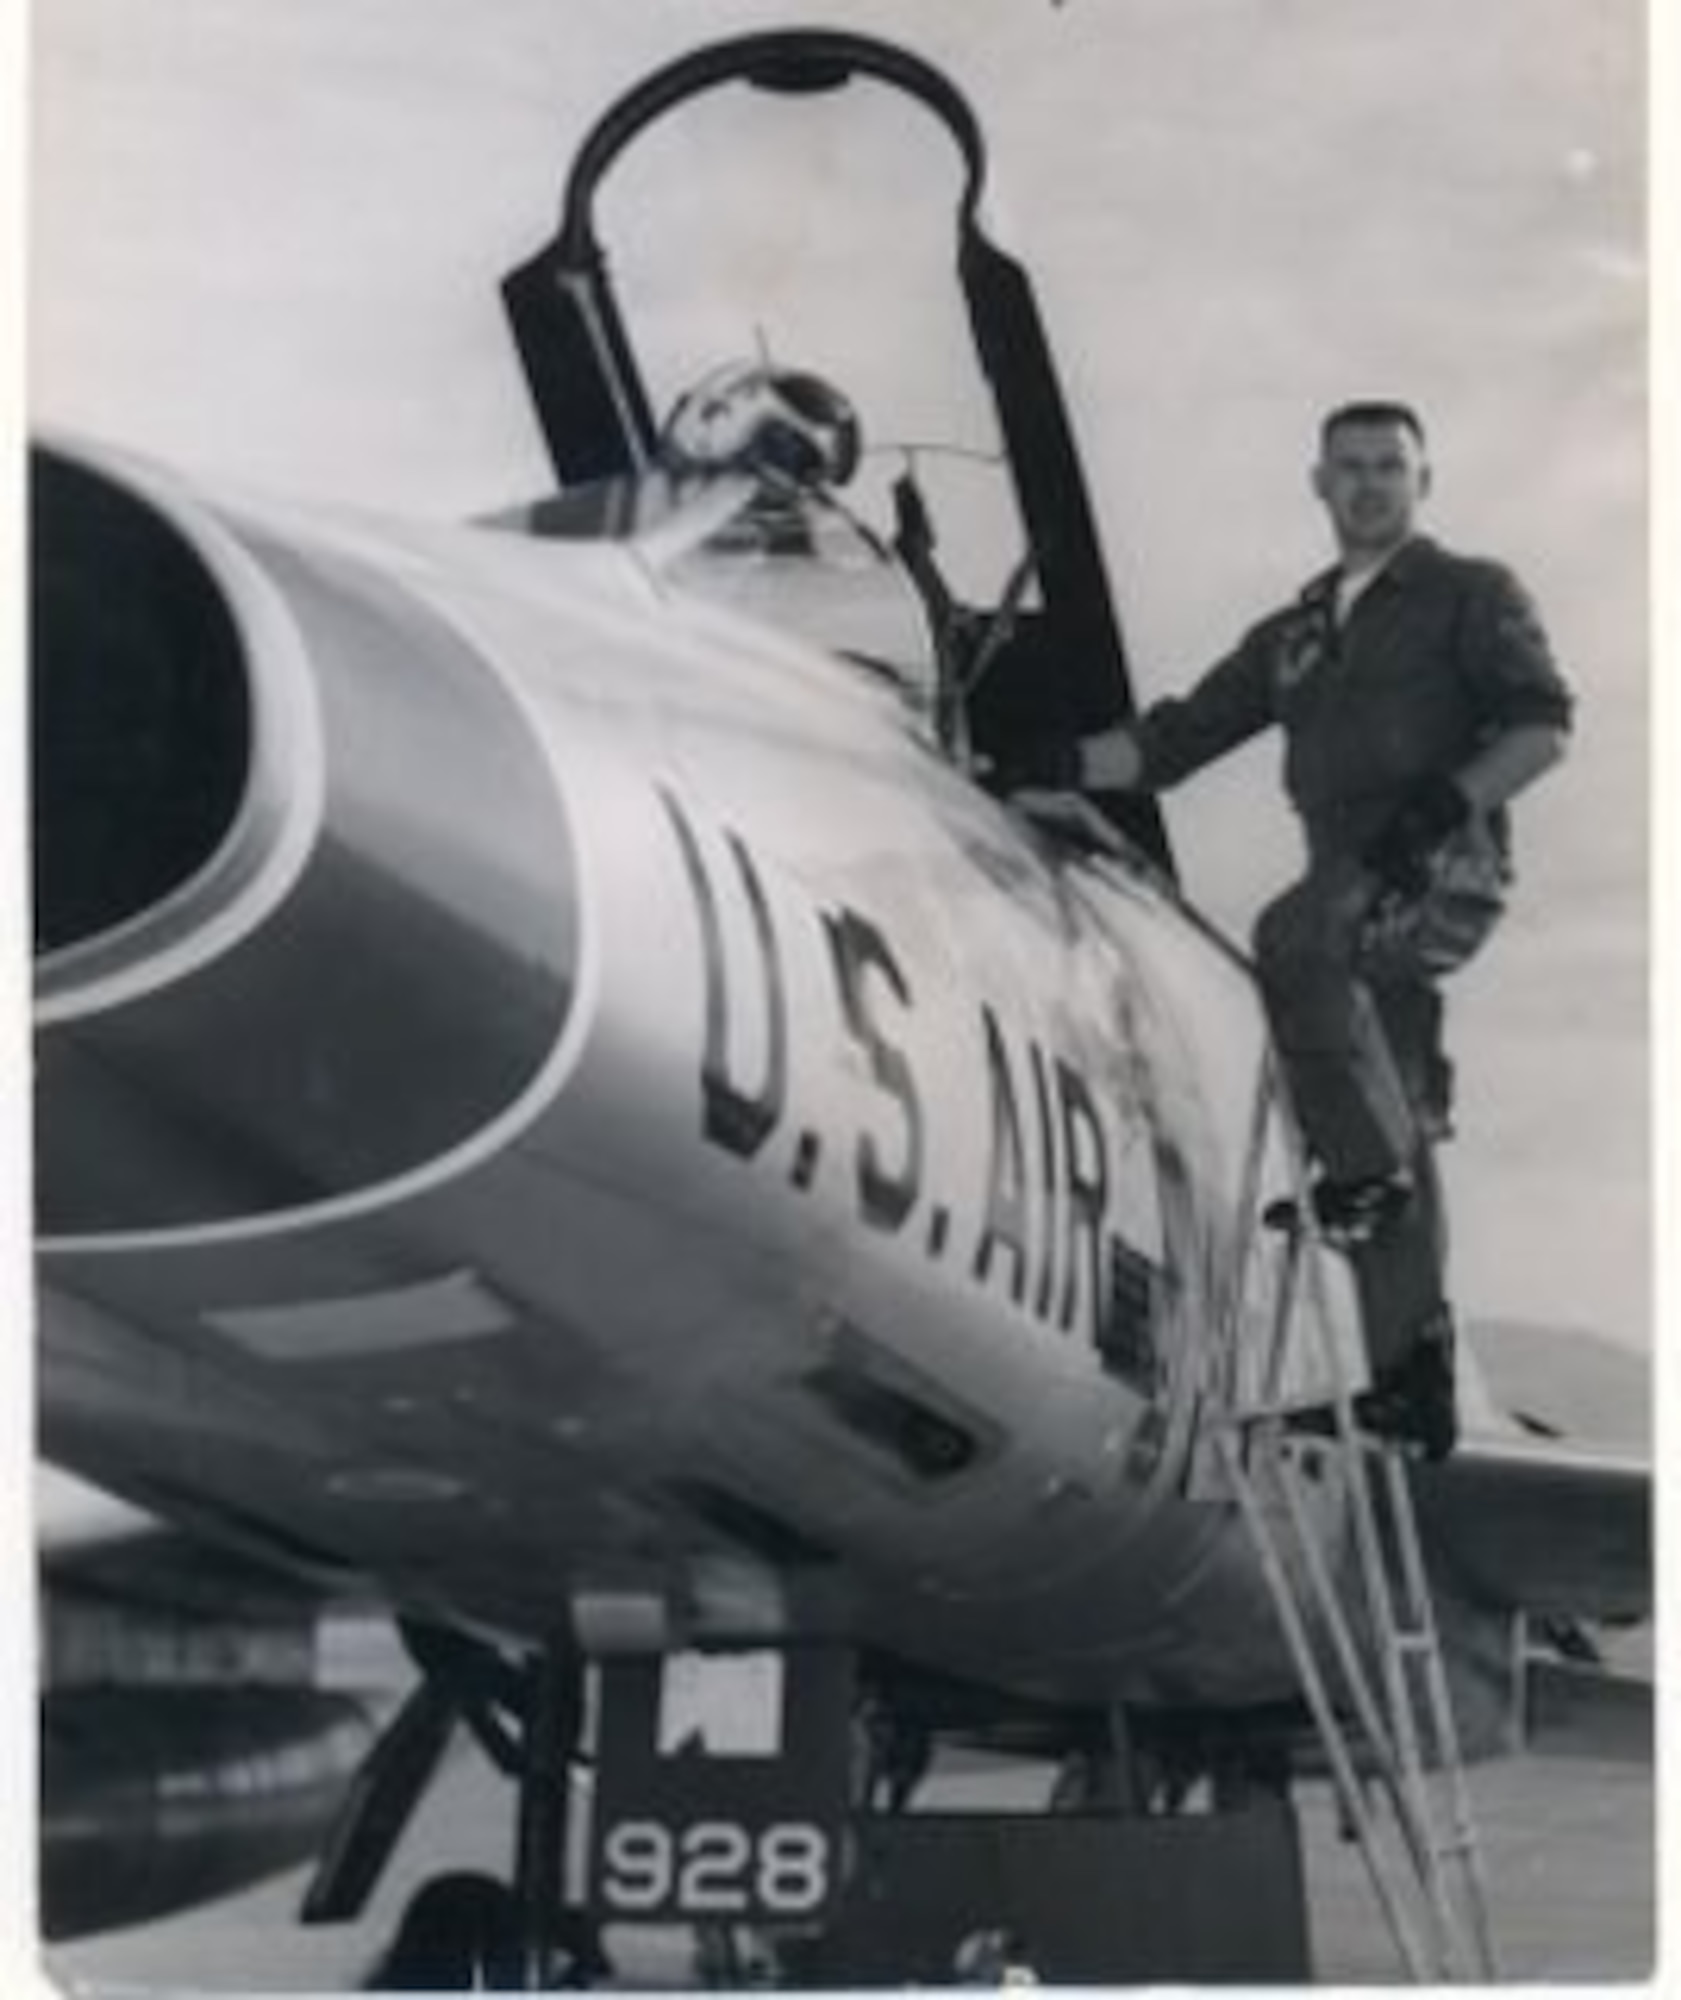 Captain David Hrdlicka poses for a photo alongside an F-100 Super Sabre after a flight in October 1963 at McConnell Air Force Base, Kansas